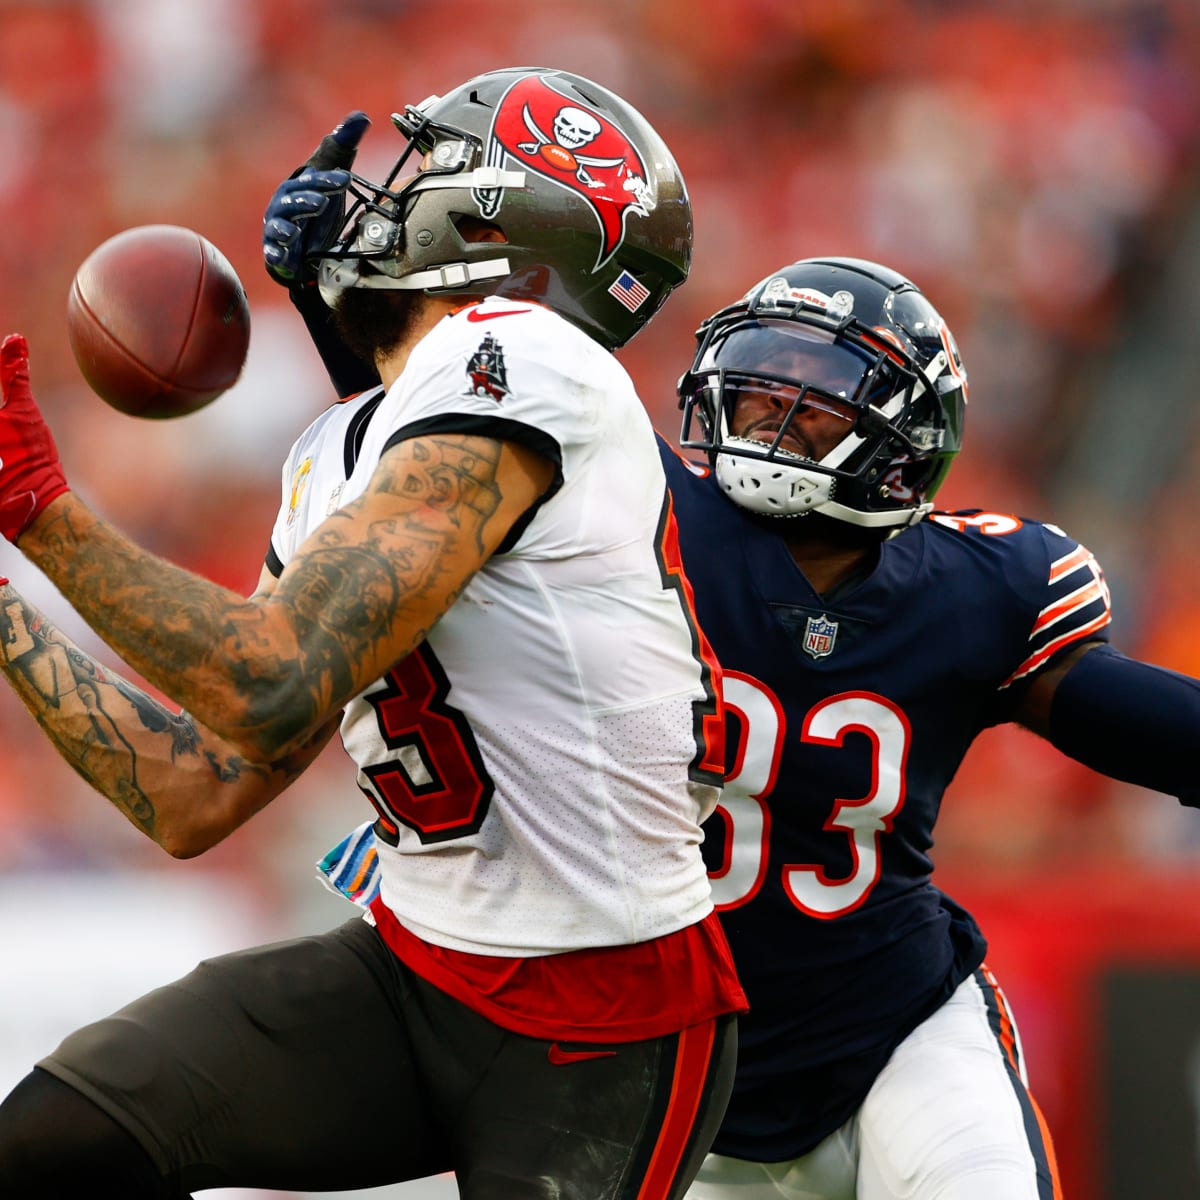 LIVE UPDATES: Tampa Bay Buccaneers vs. Chicago Bears - Tampa Bay